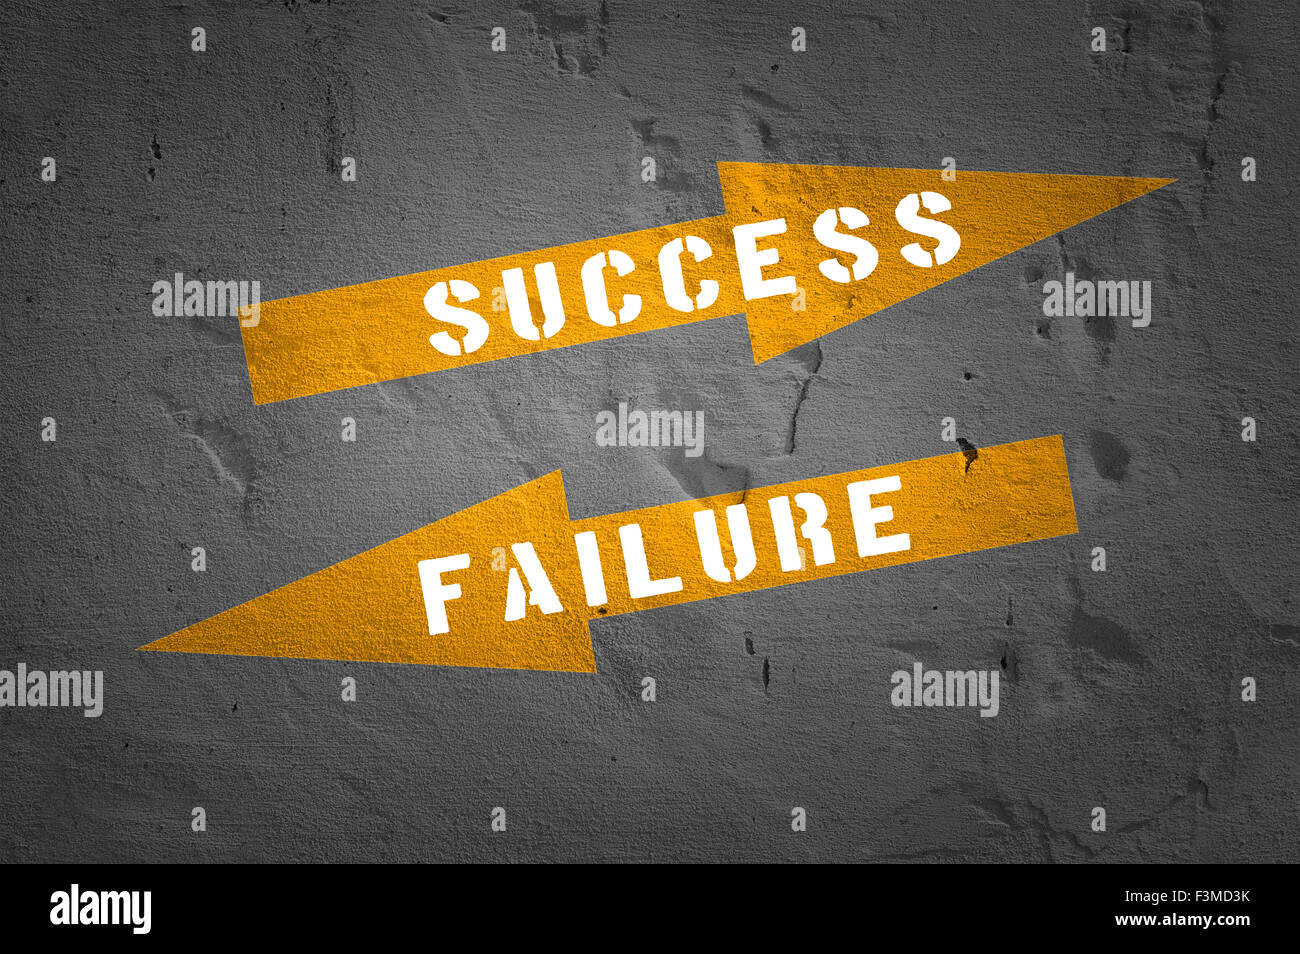 Failure and Success - Business Concept Stock Photo